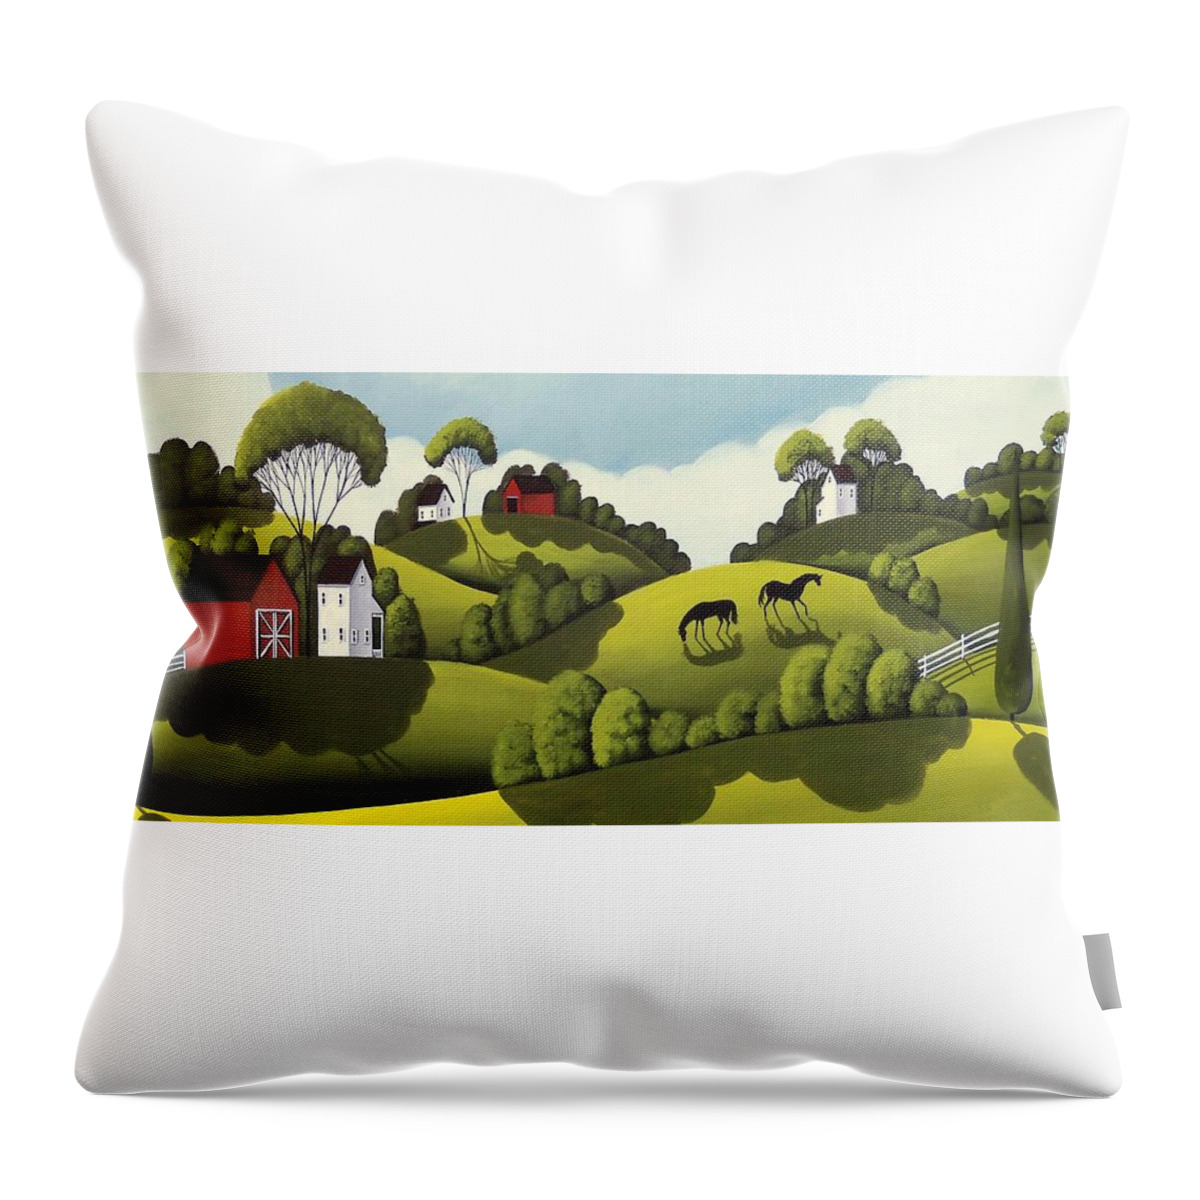 Barn Throw Pillow featuring the painting Red Barns - country landscape by Debbie Criswell